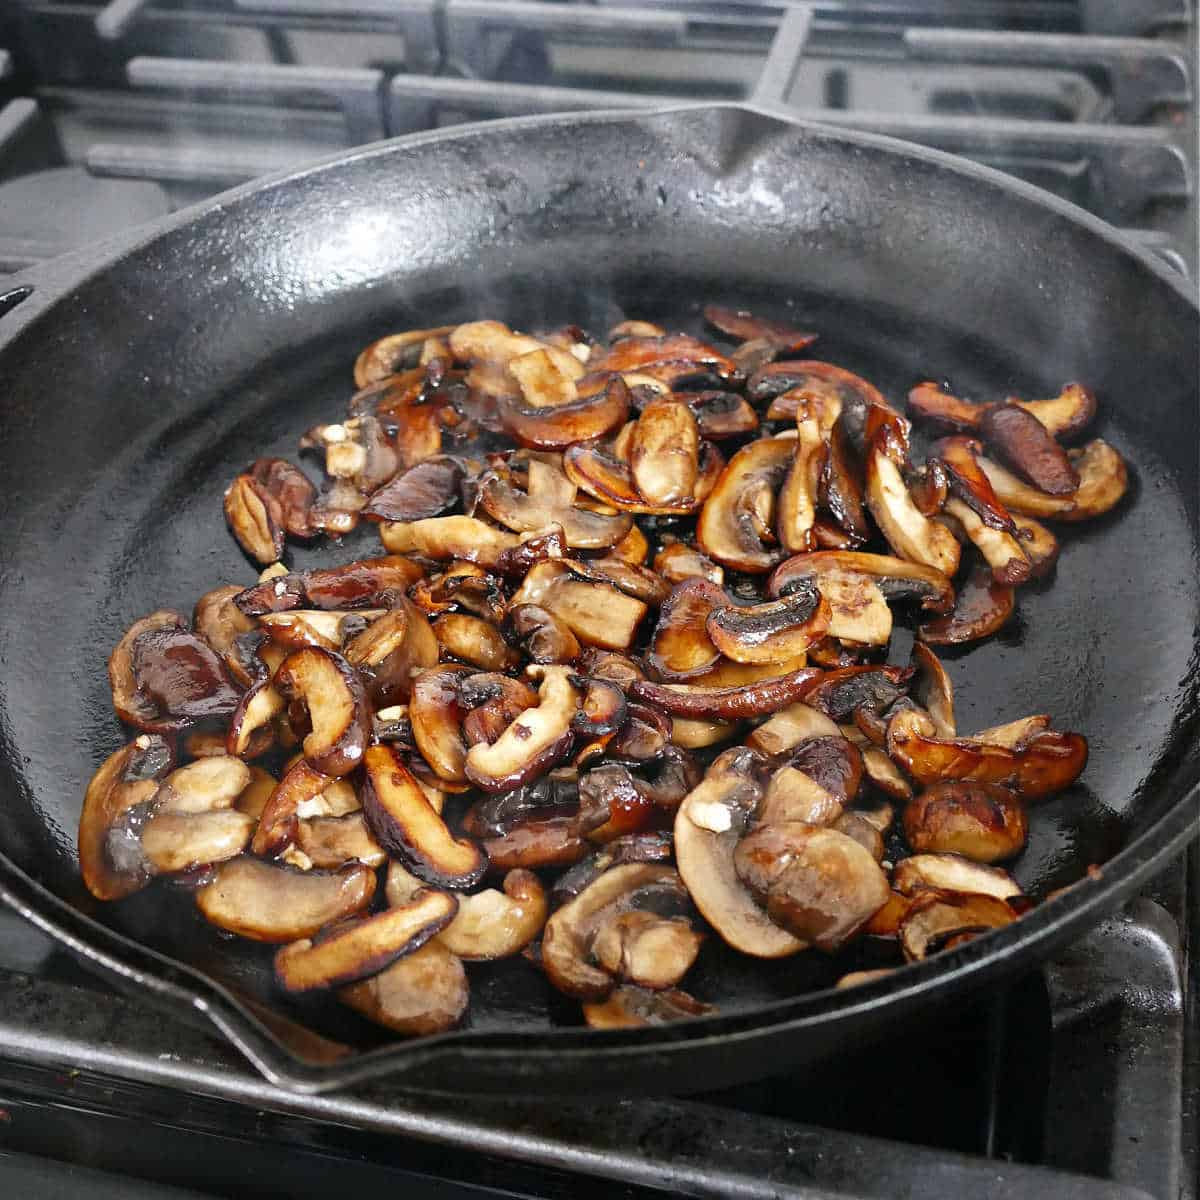 caramelized mushrooms in a skillet before adding vinegar and maple syrup